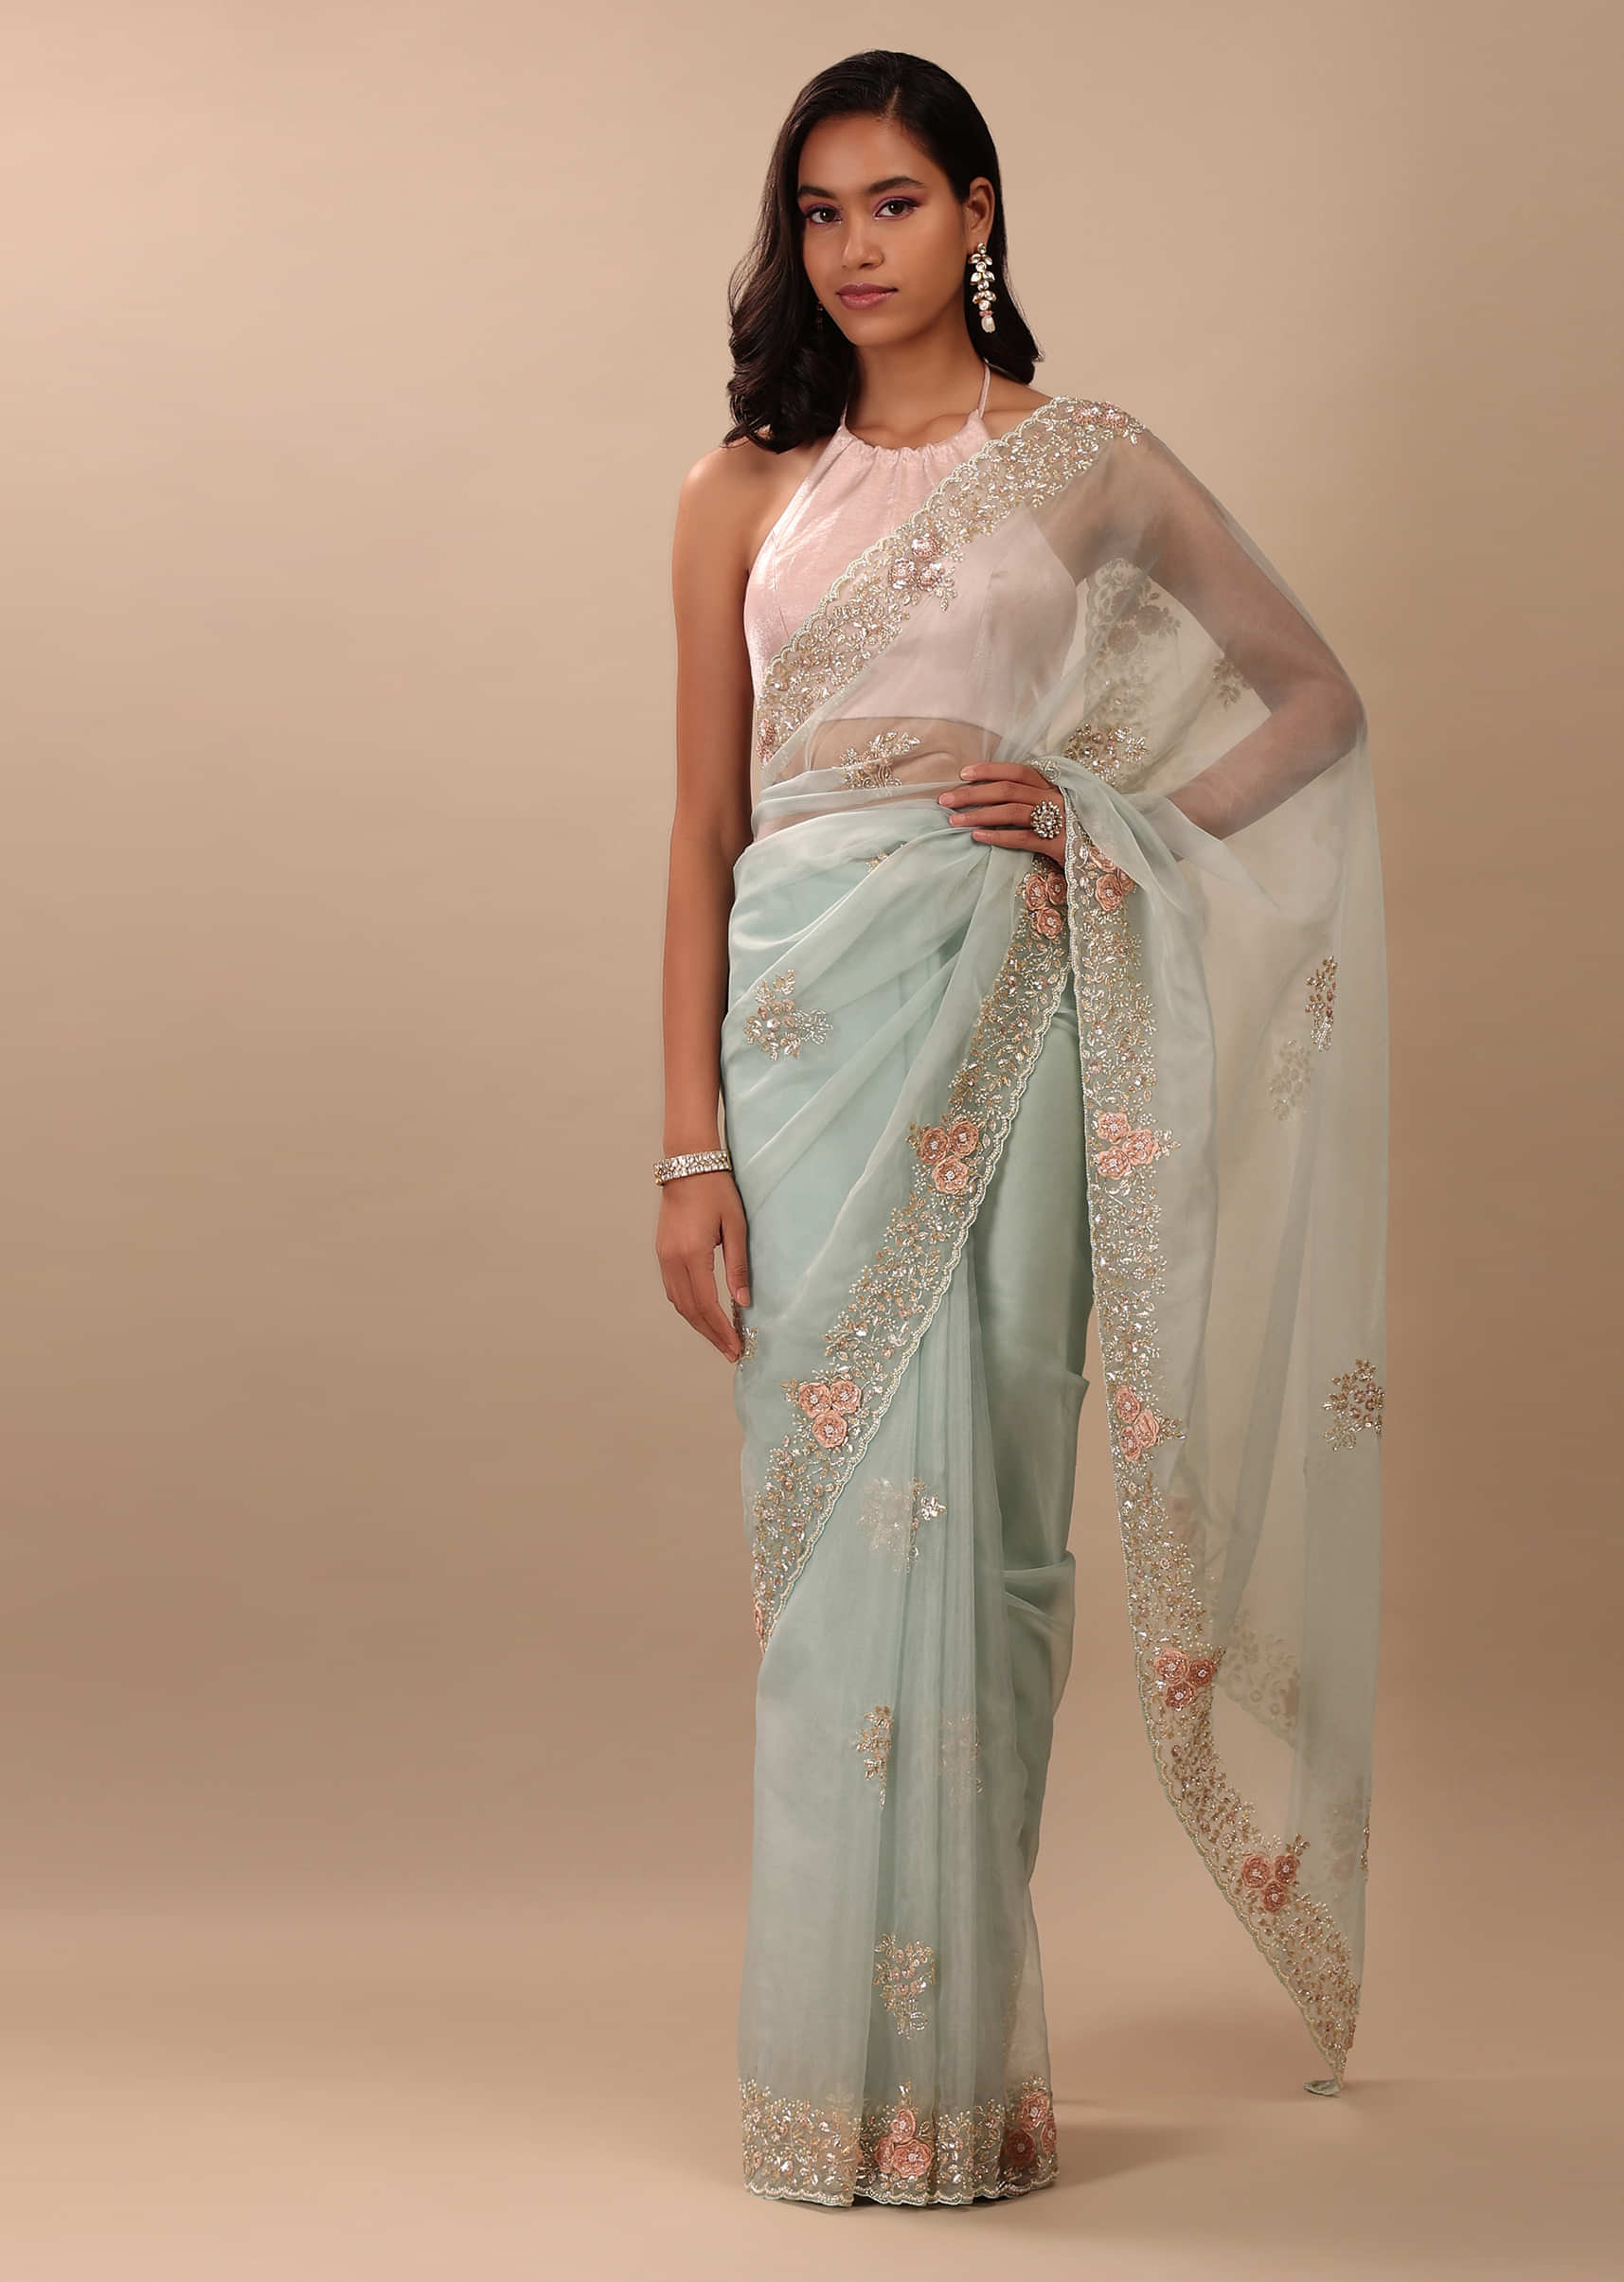 Sky Blue Saree In Organza With 3D Floral Embroidery In Pearls And Cut Dana